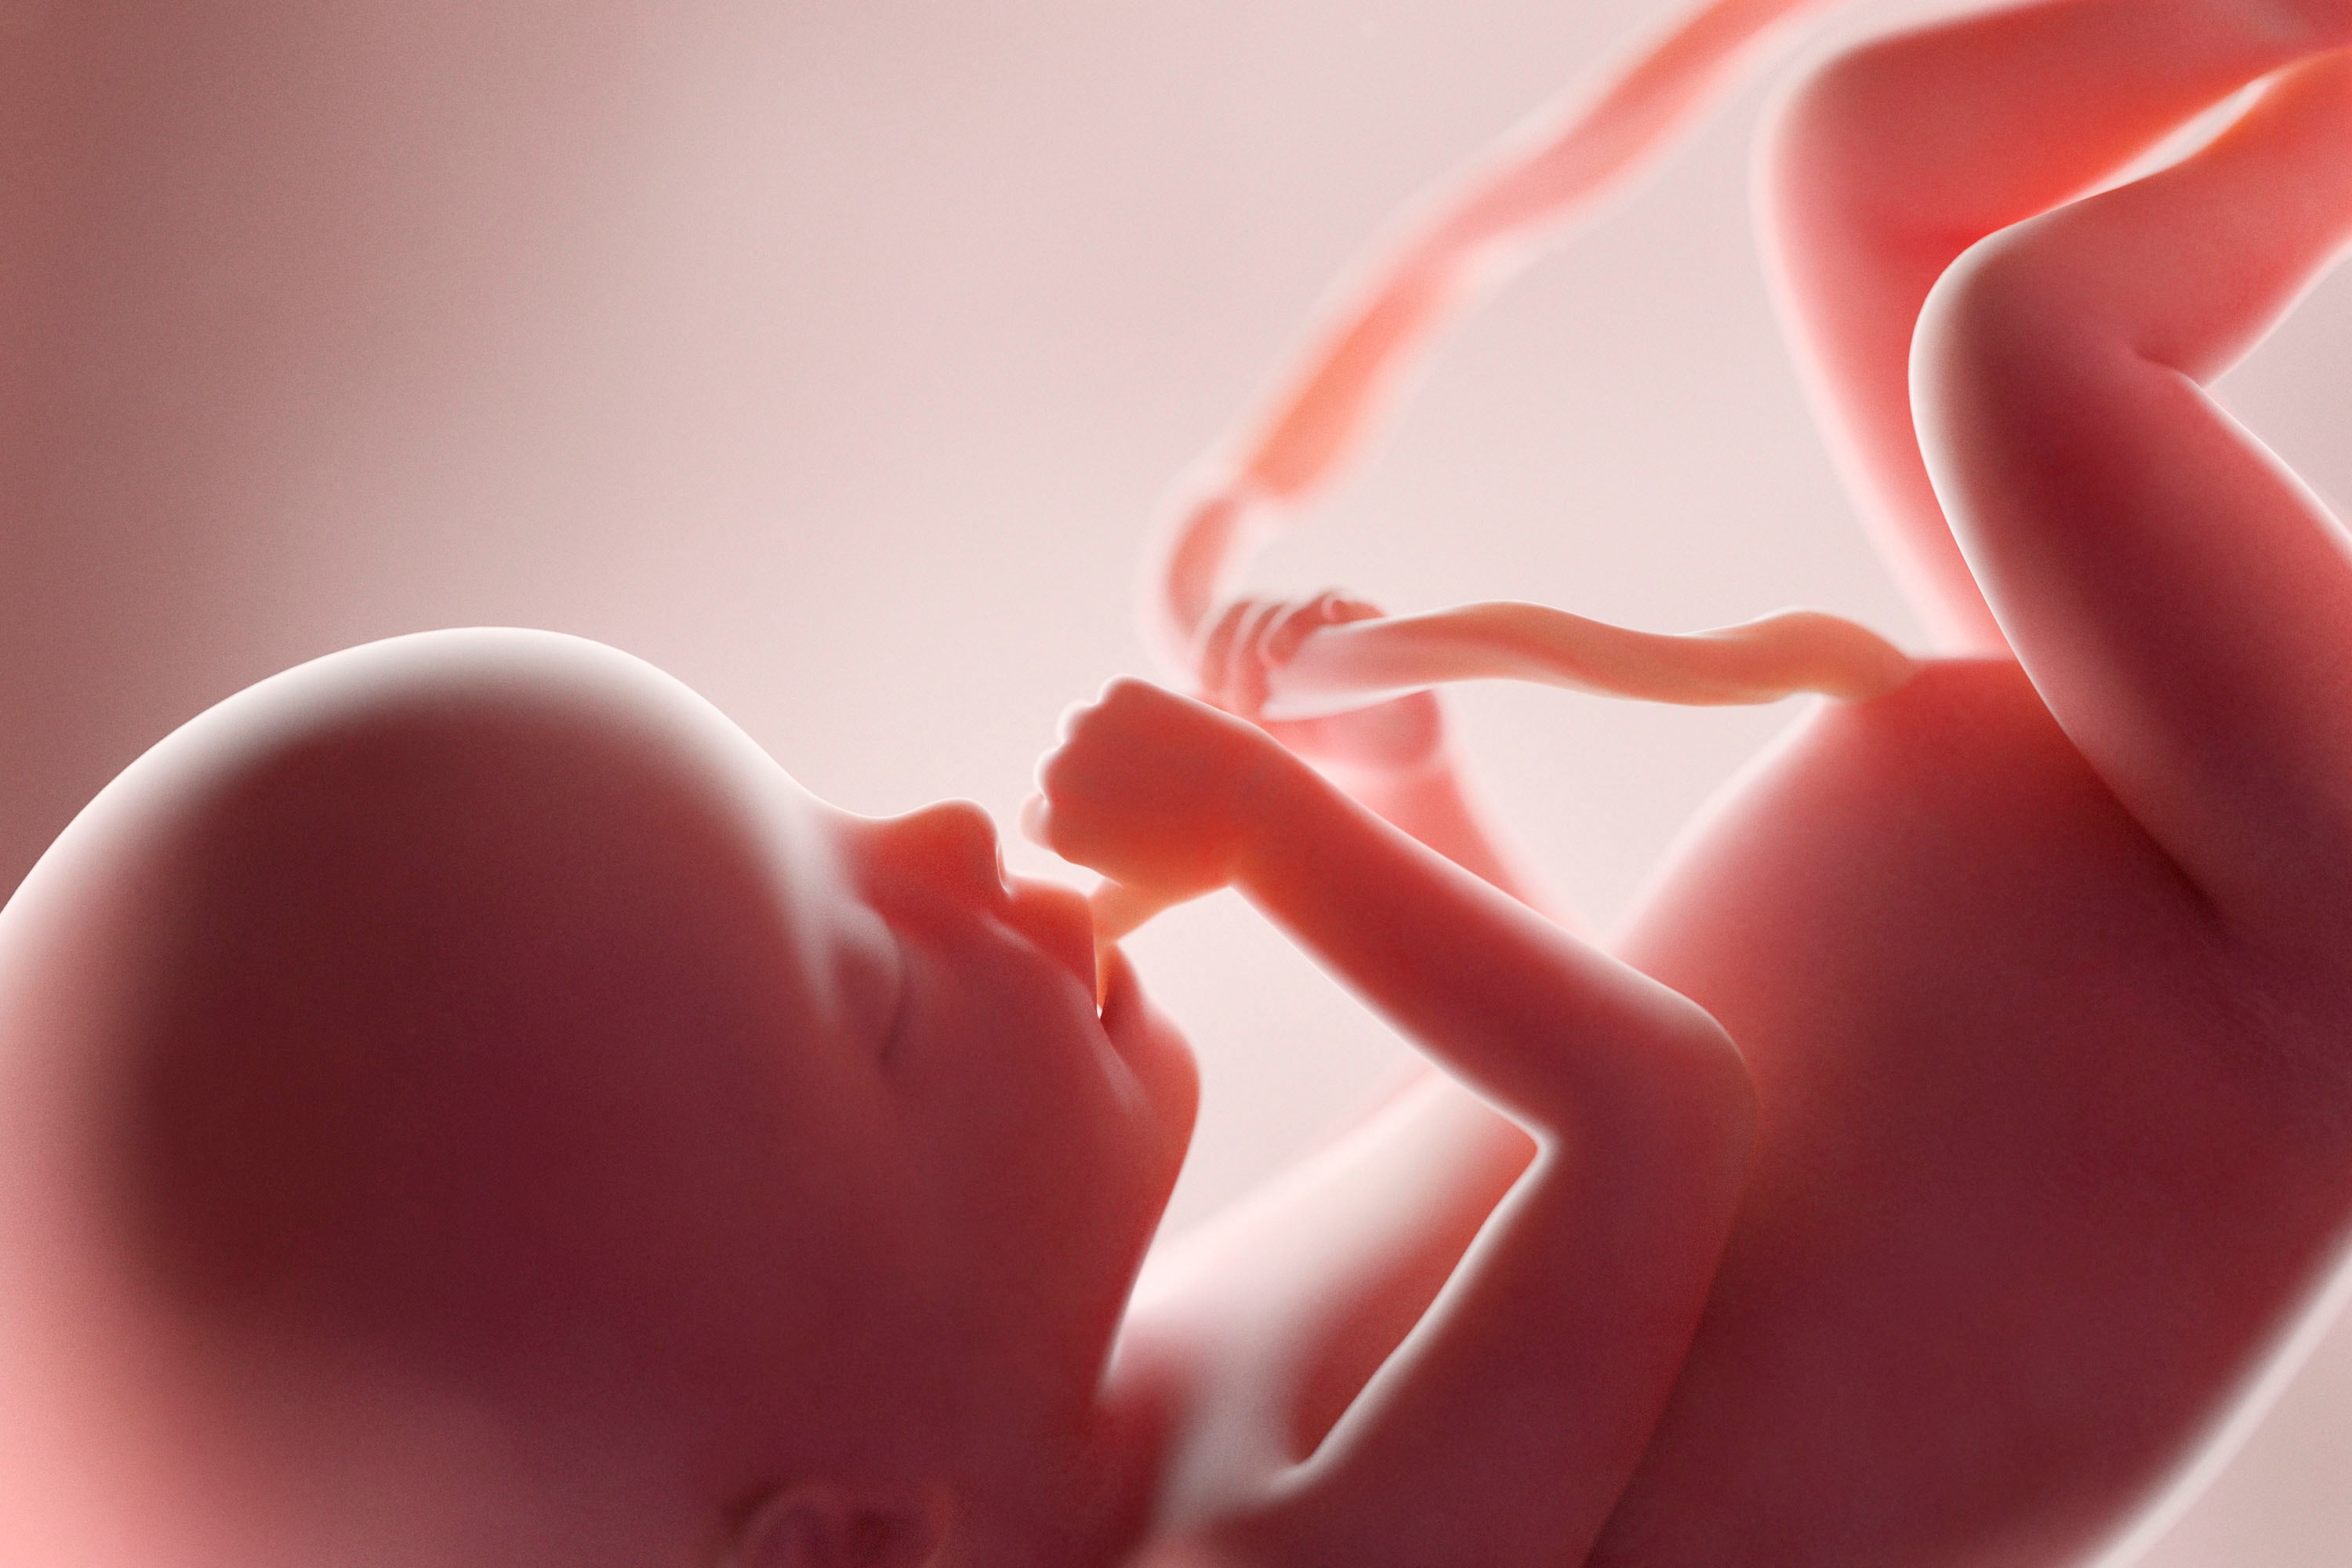 A computer illustration of a pink fetus with an umbilical cord and the baby with their thumb in their mouth.